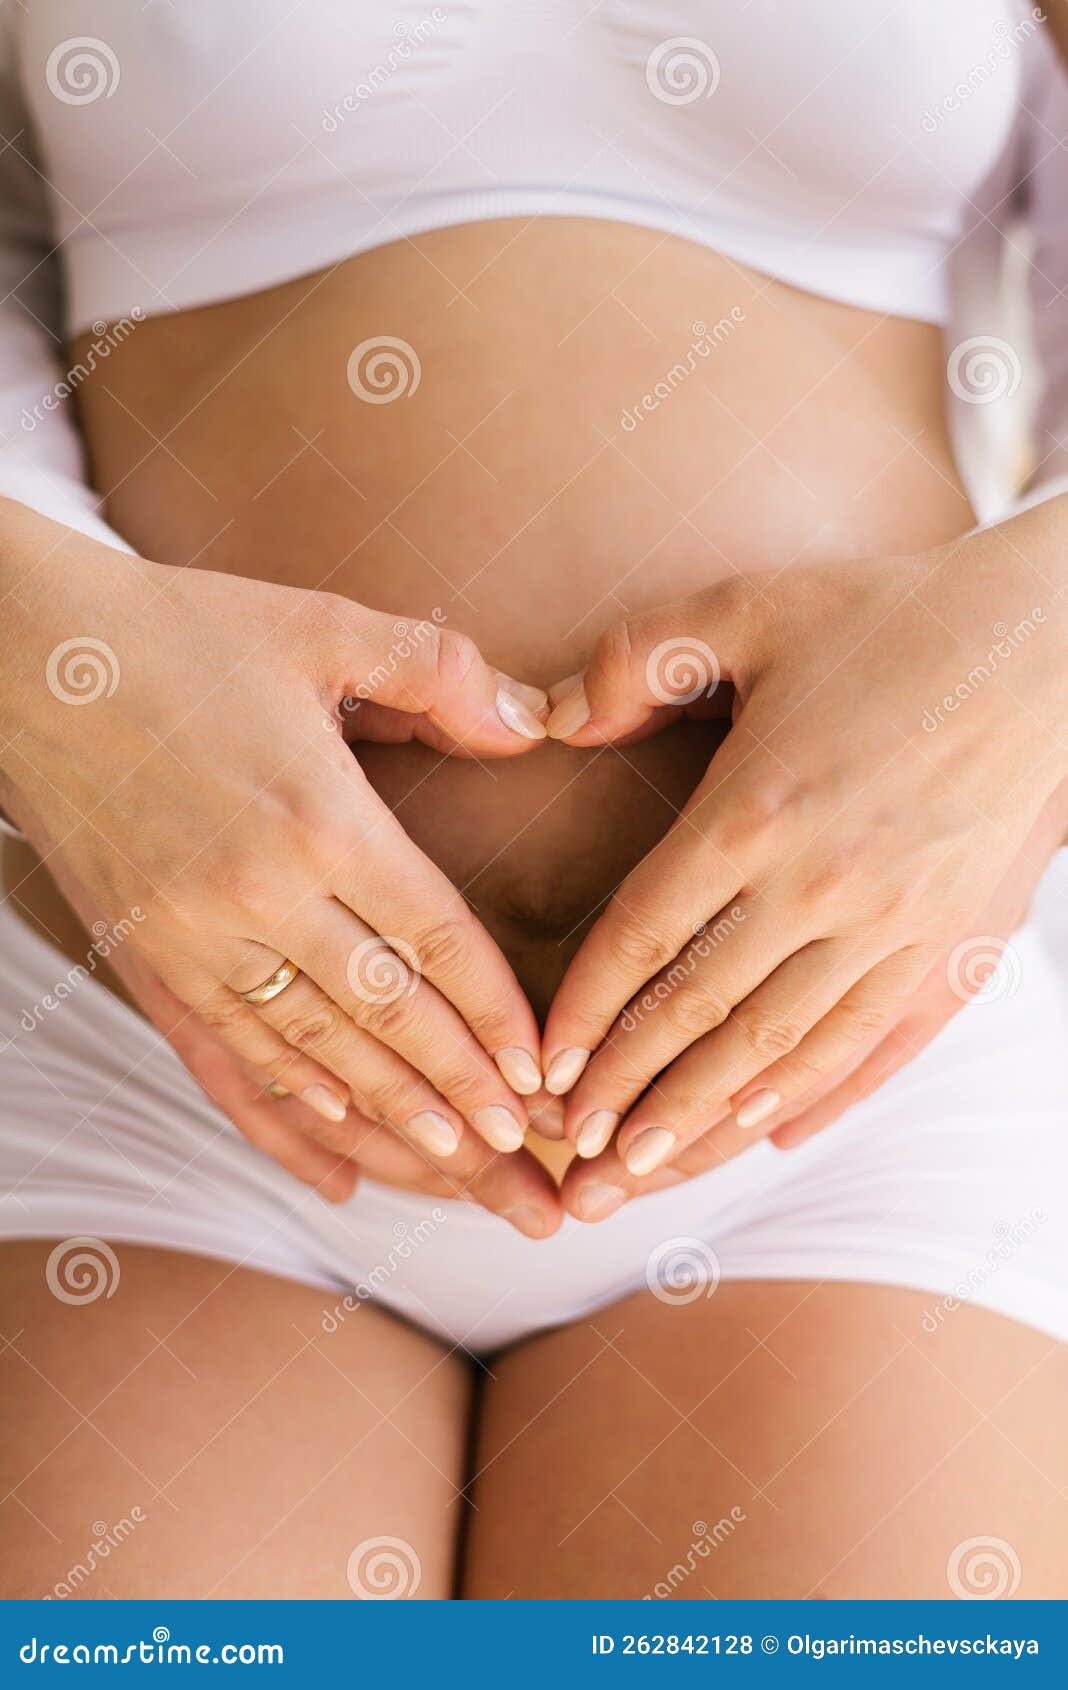 Woman with a Big Bare Tummy is Sitting on a Bed in Her Underwear with a  Bare Stomach. a Pregnant Lady and Her Husband Hold Their Stock Photo -  Image of contemplation